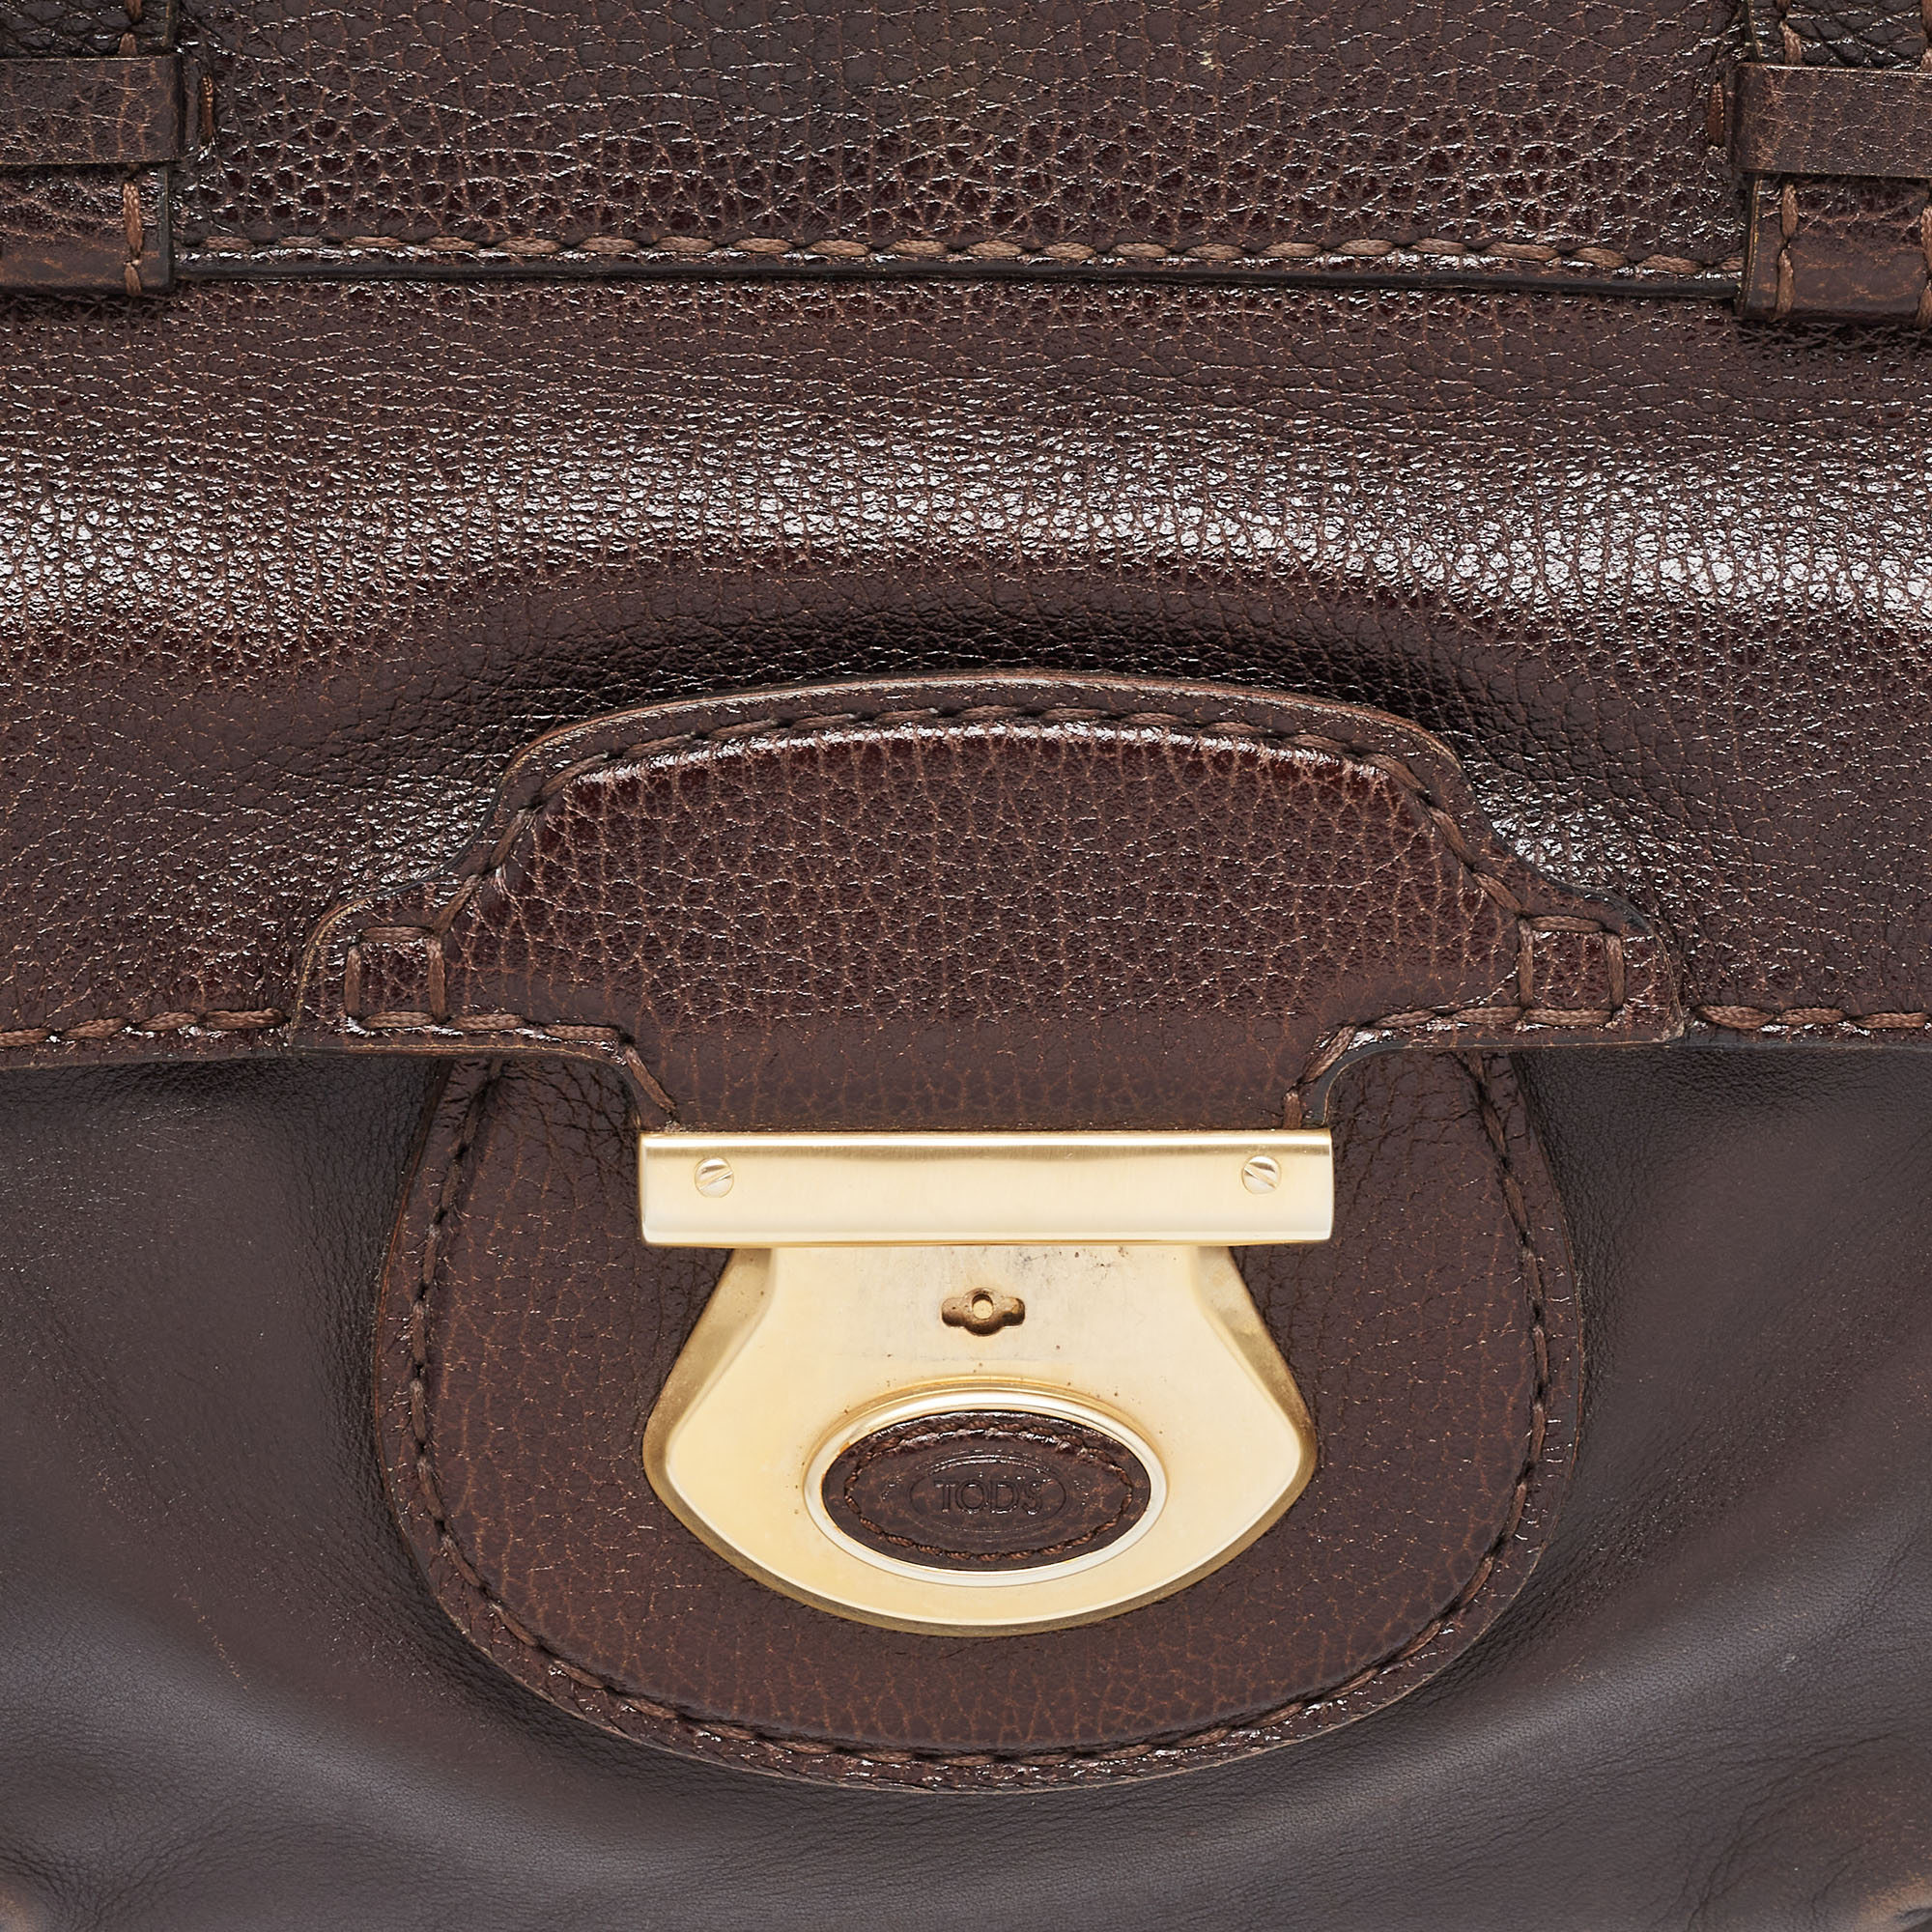 Tod's Choco Brown Leather Front Pocket Satchel